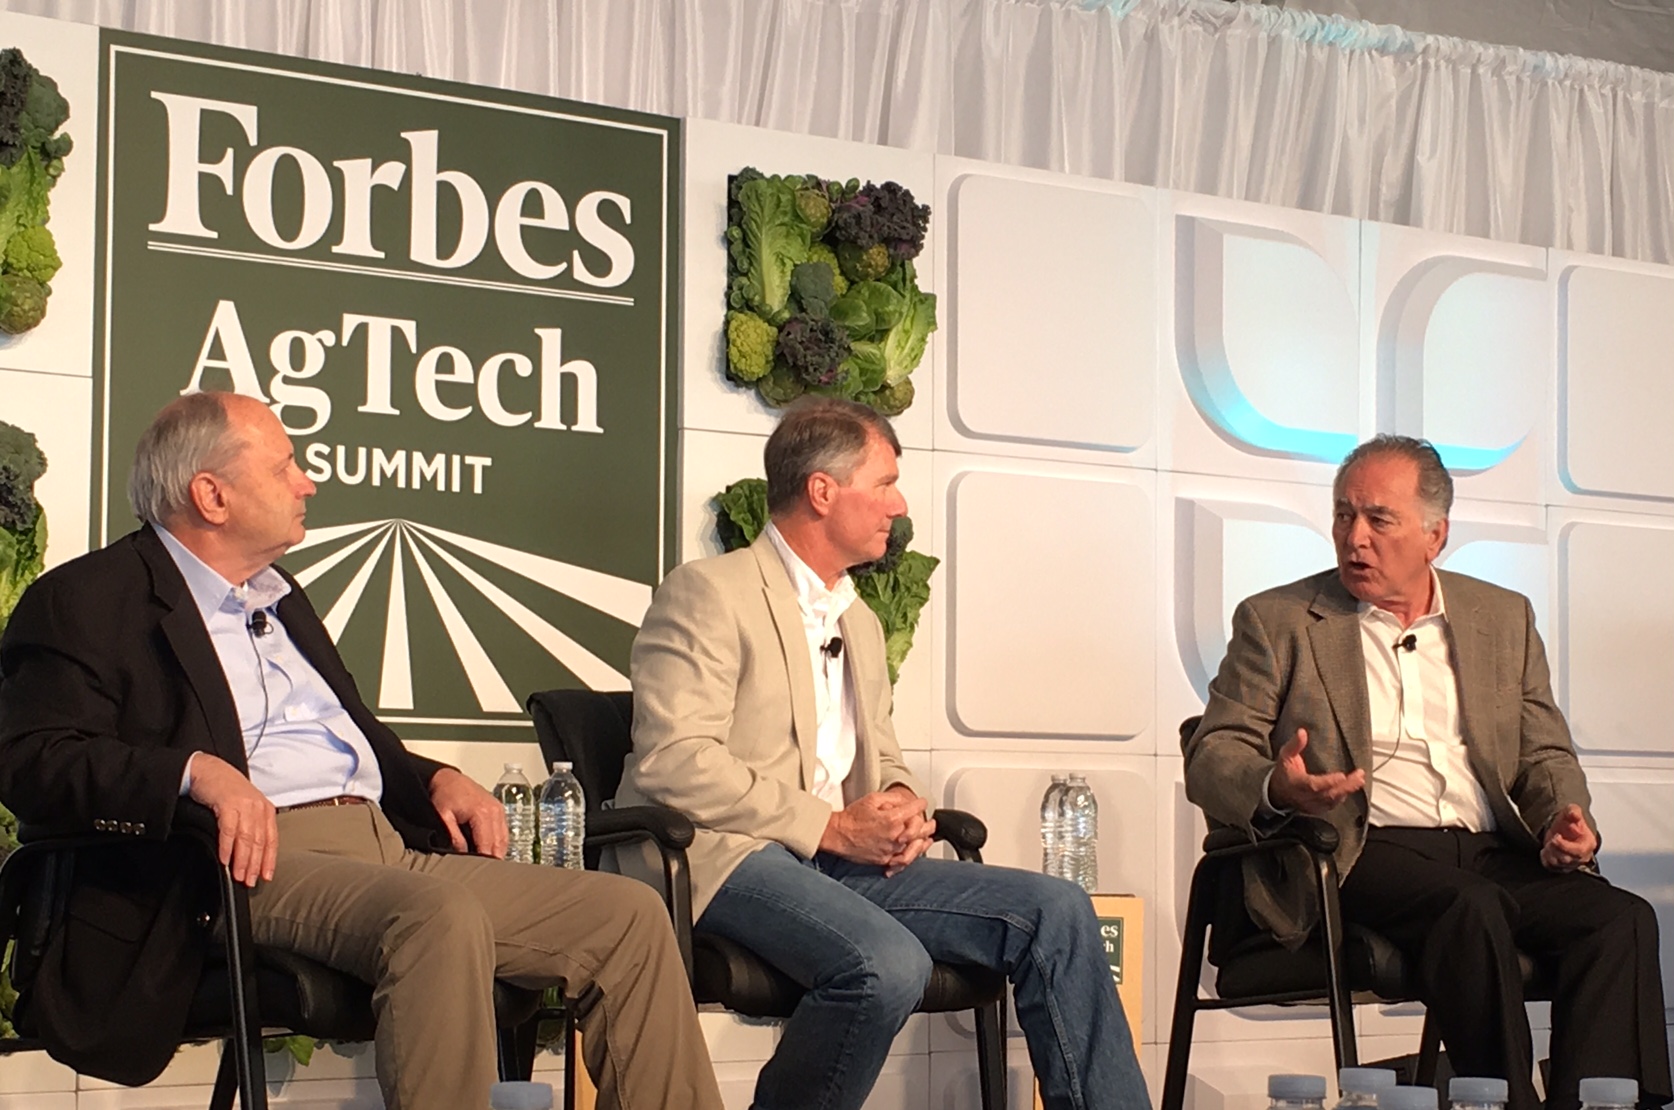 625 Participants Apprised of Advancements in AgTech during Forbes